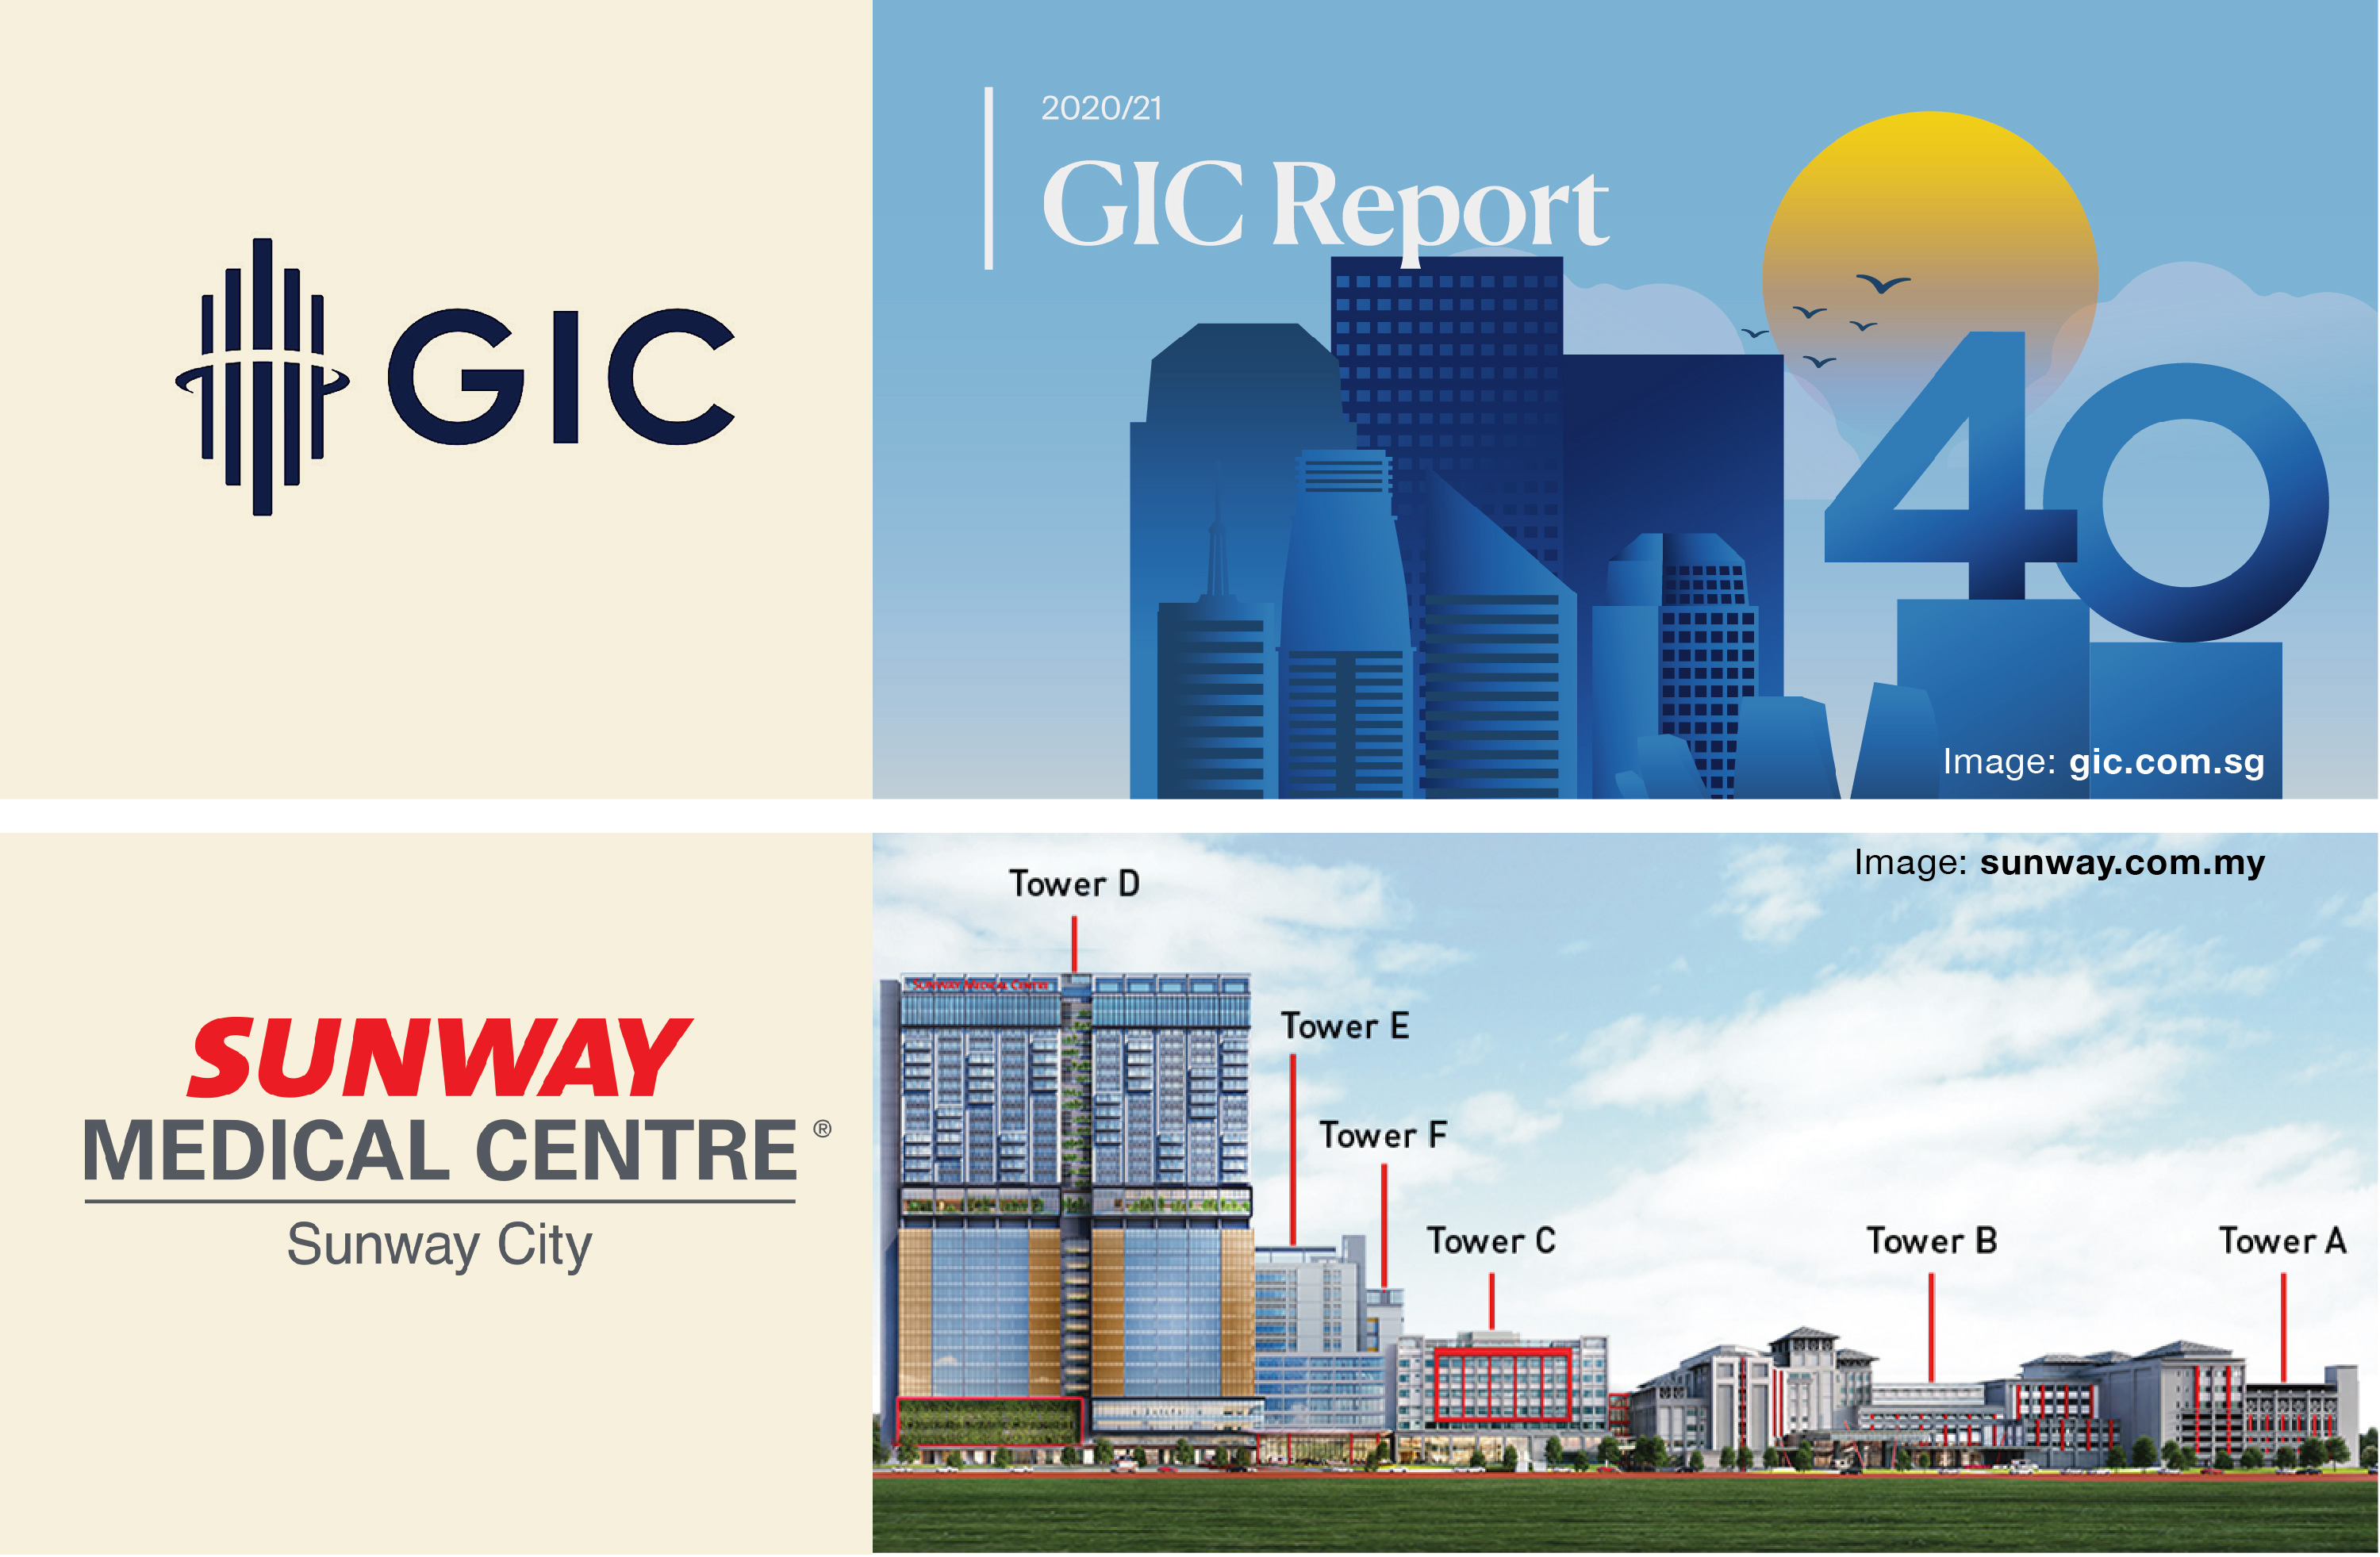 Singapore's GIC Buys 16% Stake in SUNWAY HEALTHCARE